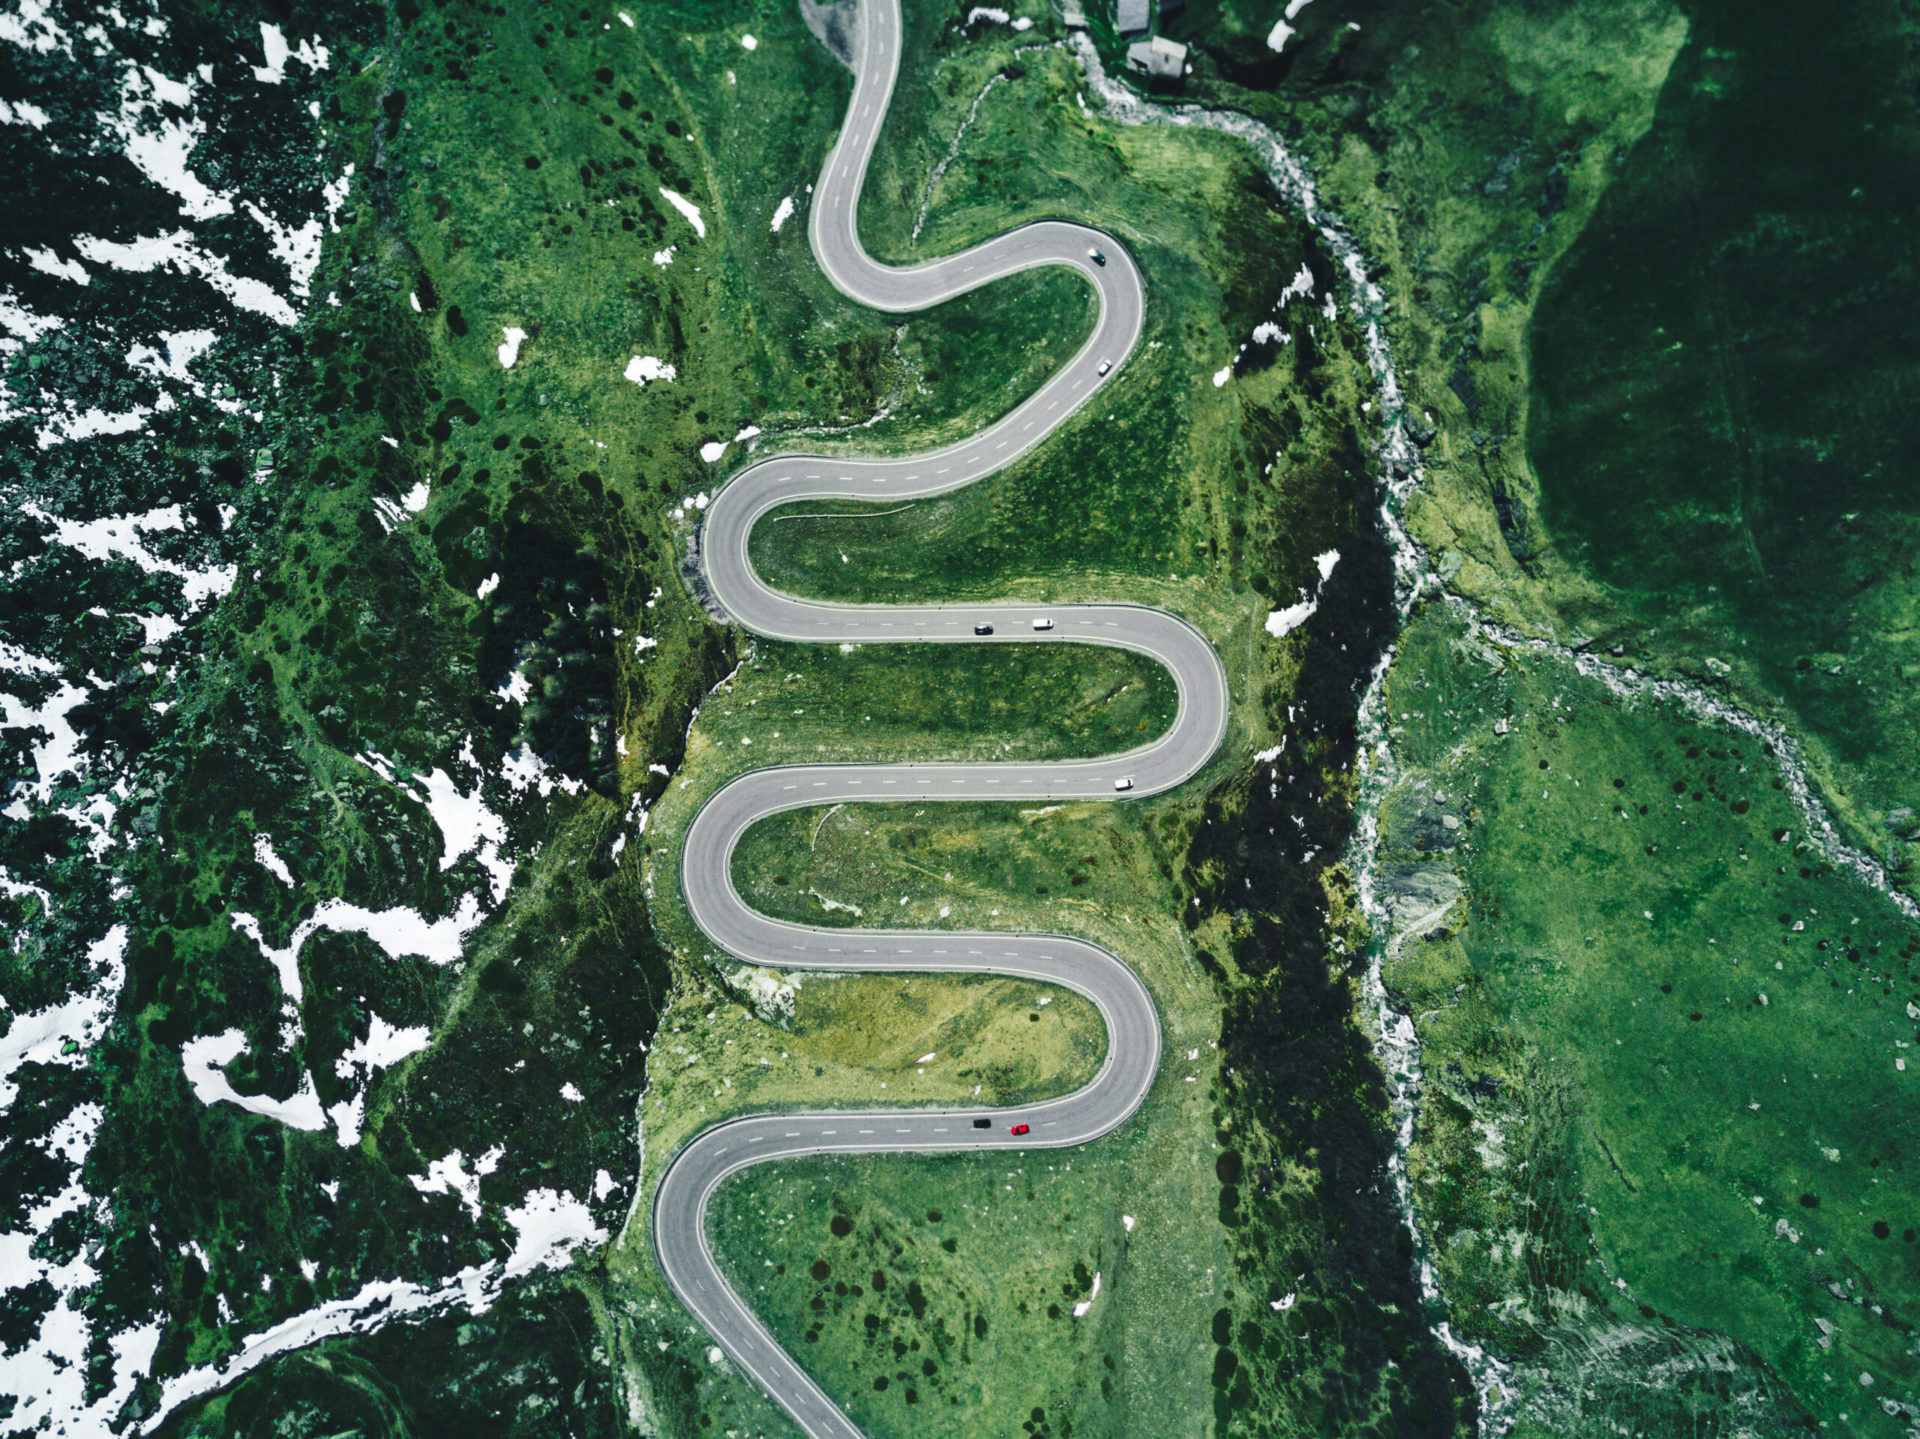 Sky view in switzerland showing a zig-zag road on a mountain with cars driving to represent the carrer lab service